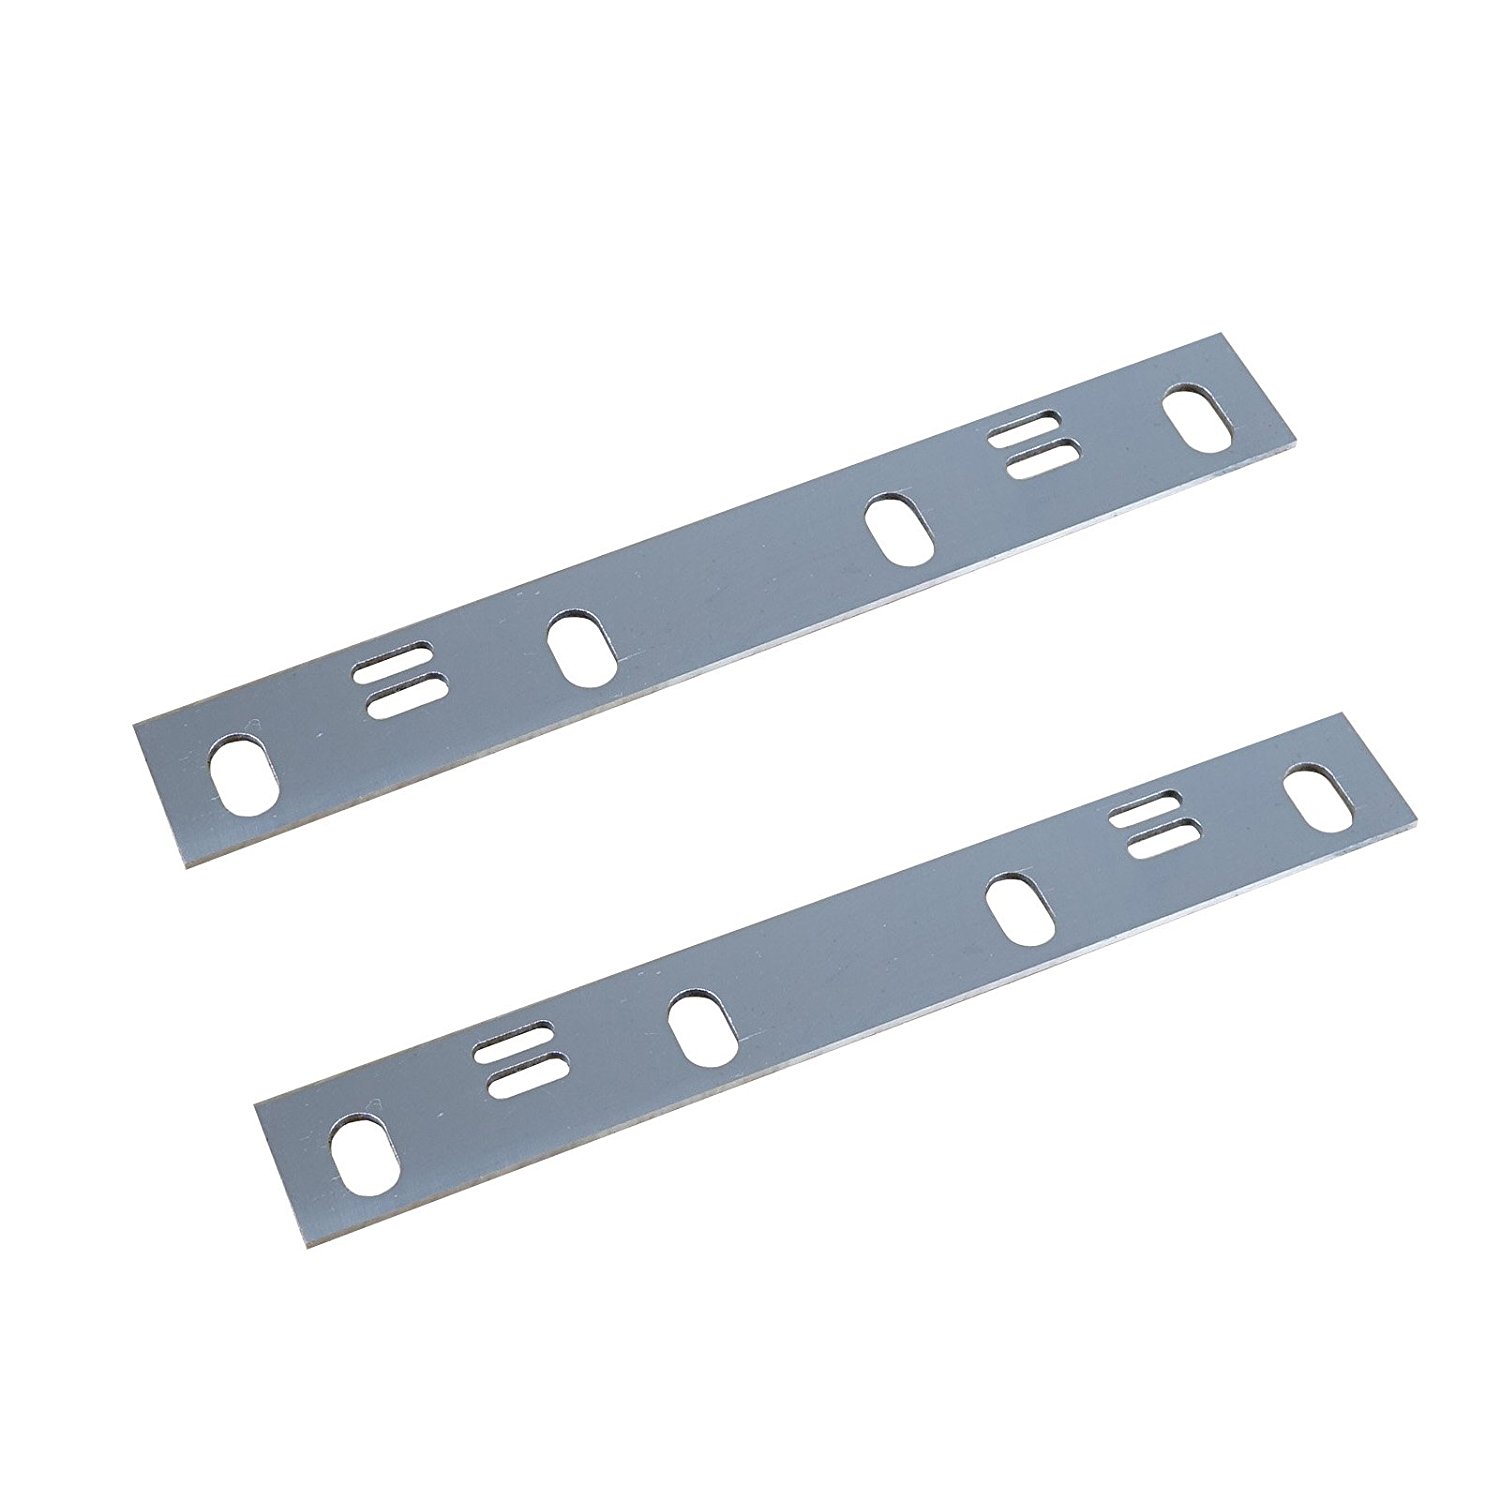 6-Inch Compatible Jointer Blades For Wen 6559, 6560T, 6560, 6560-083 ...